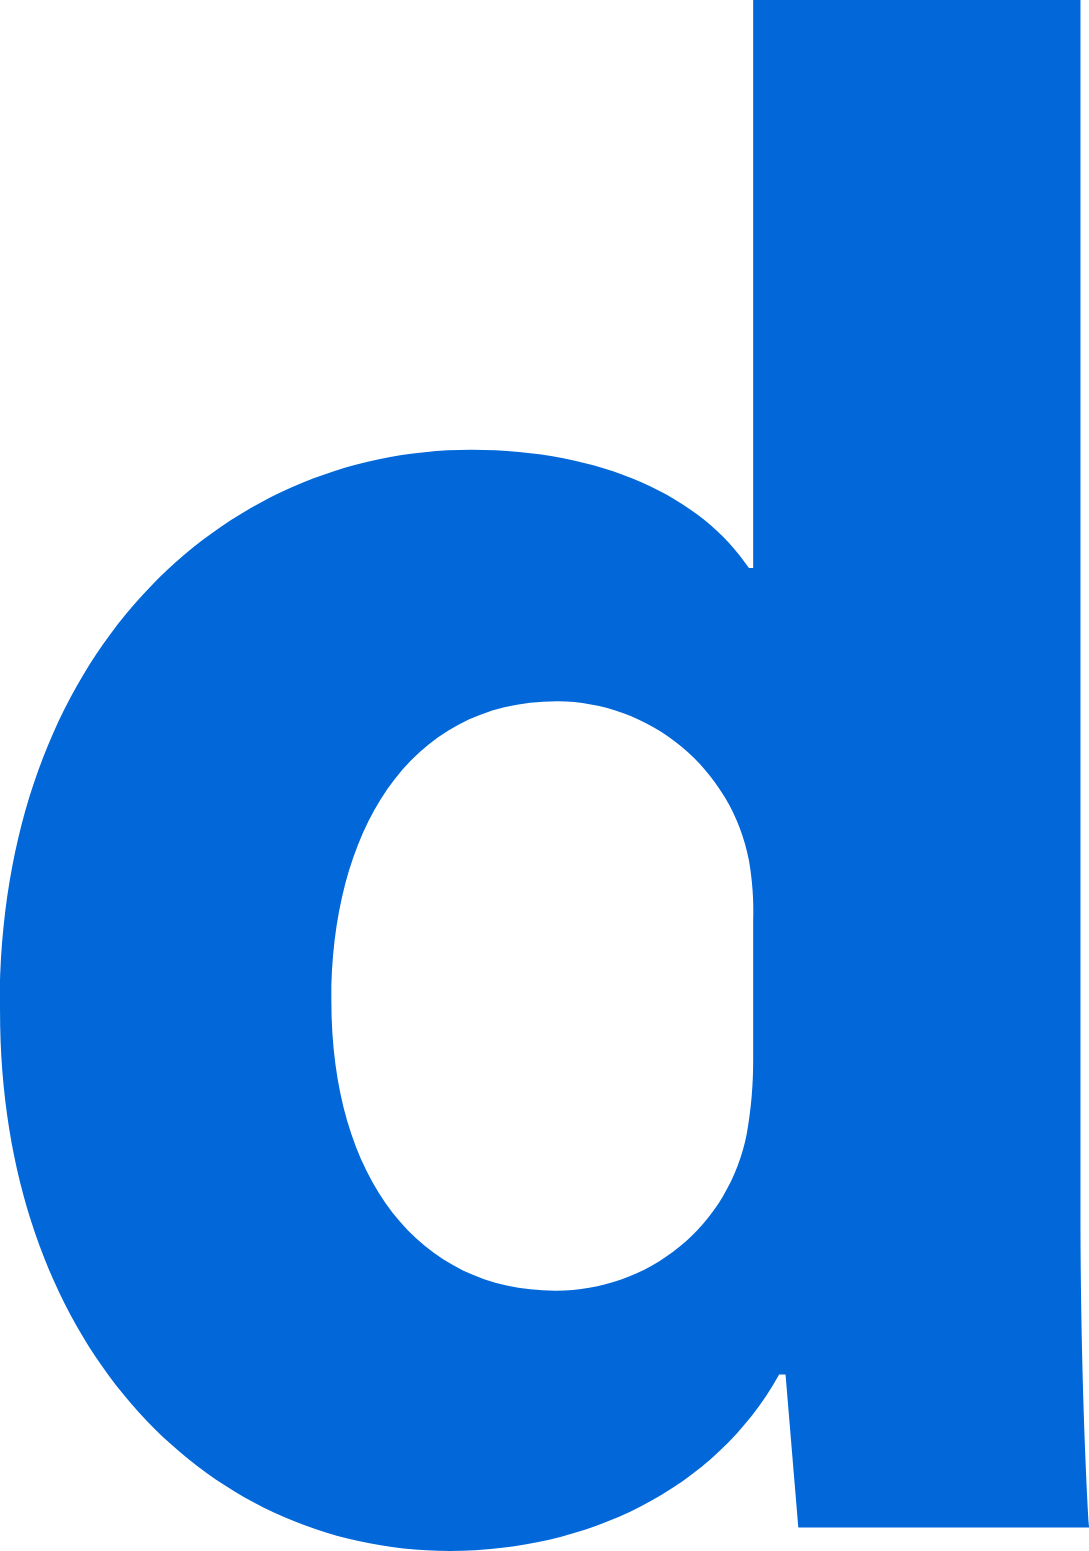 Docebo logo in transparent PNG and vectorized SVG formats